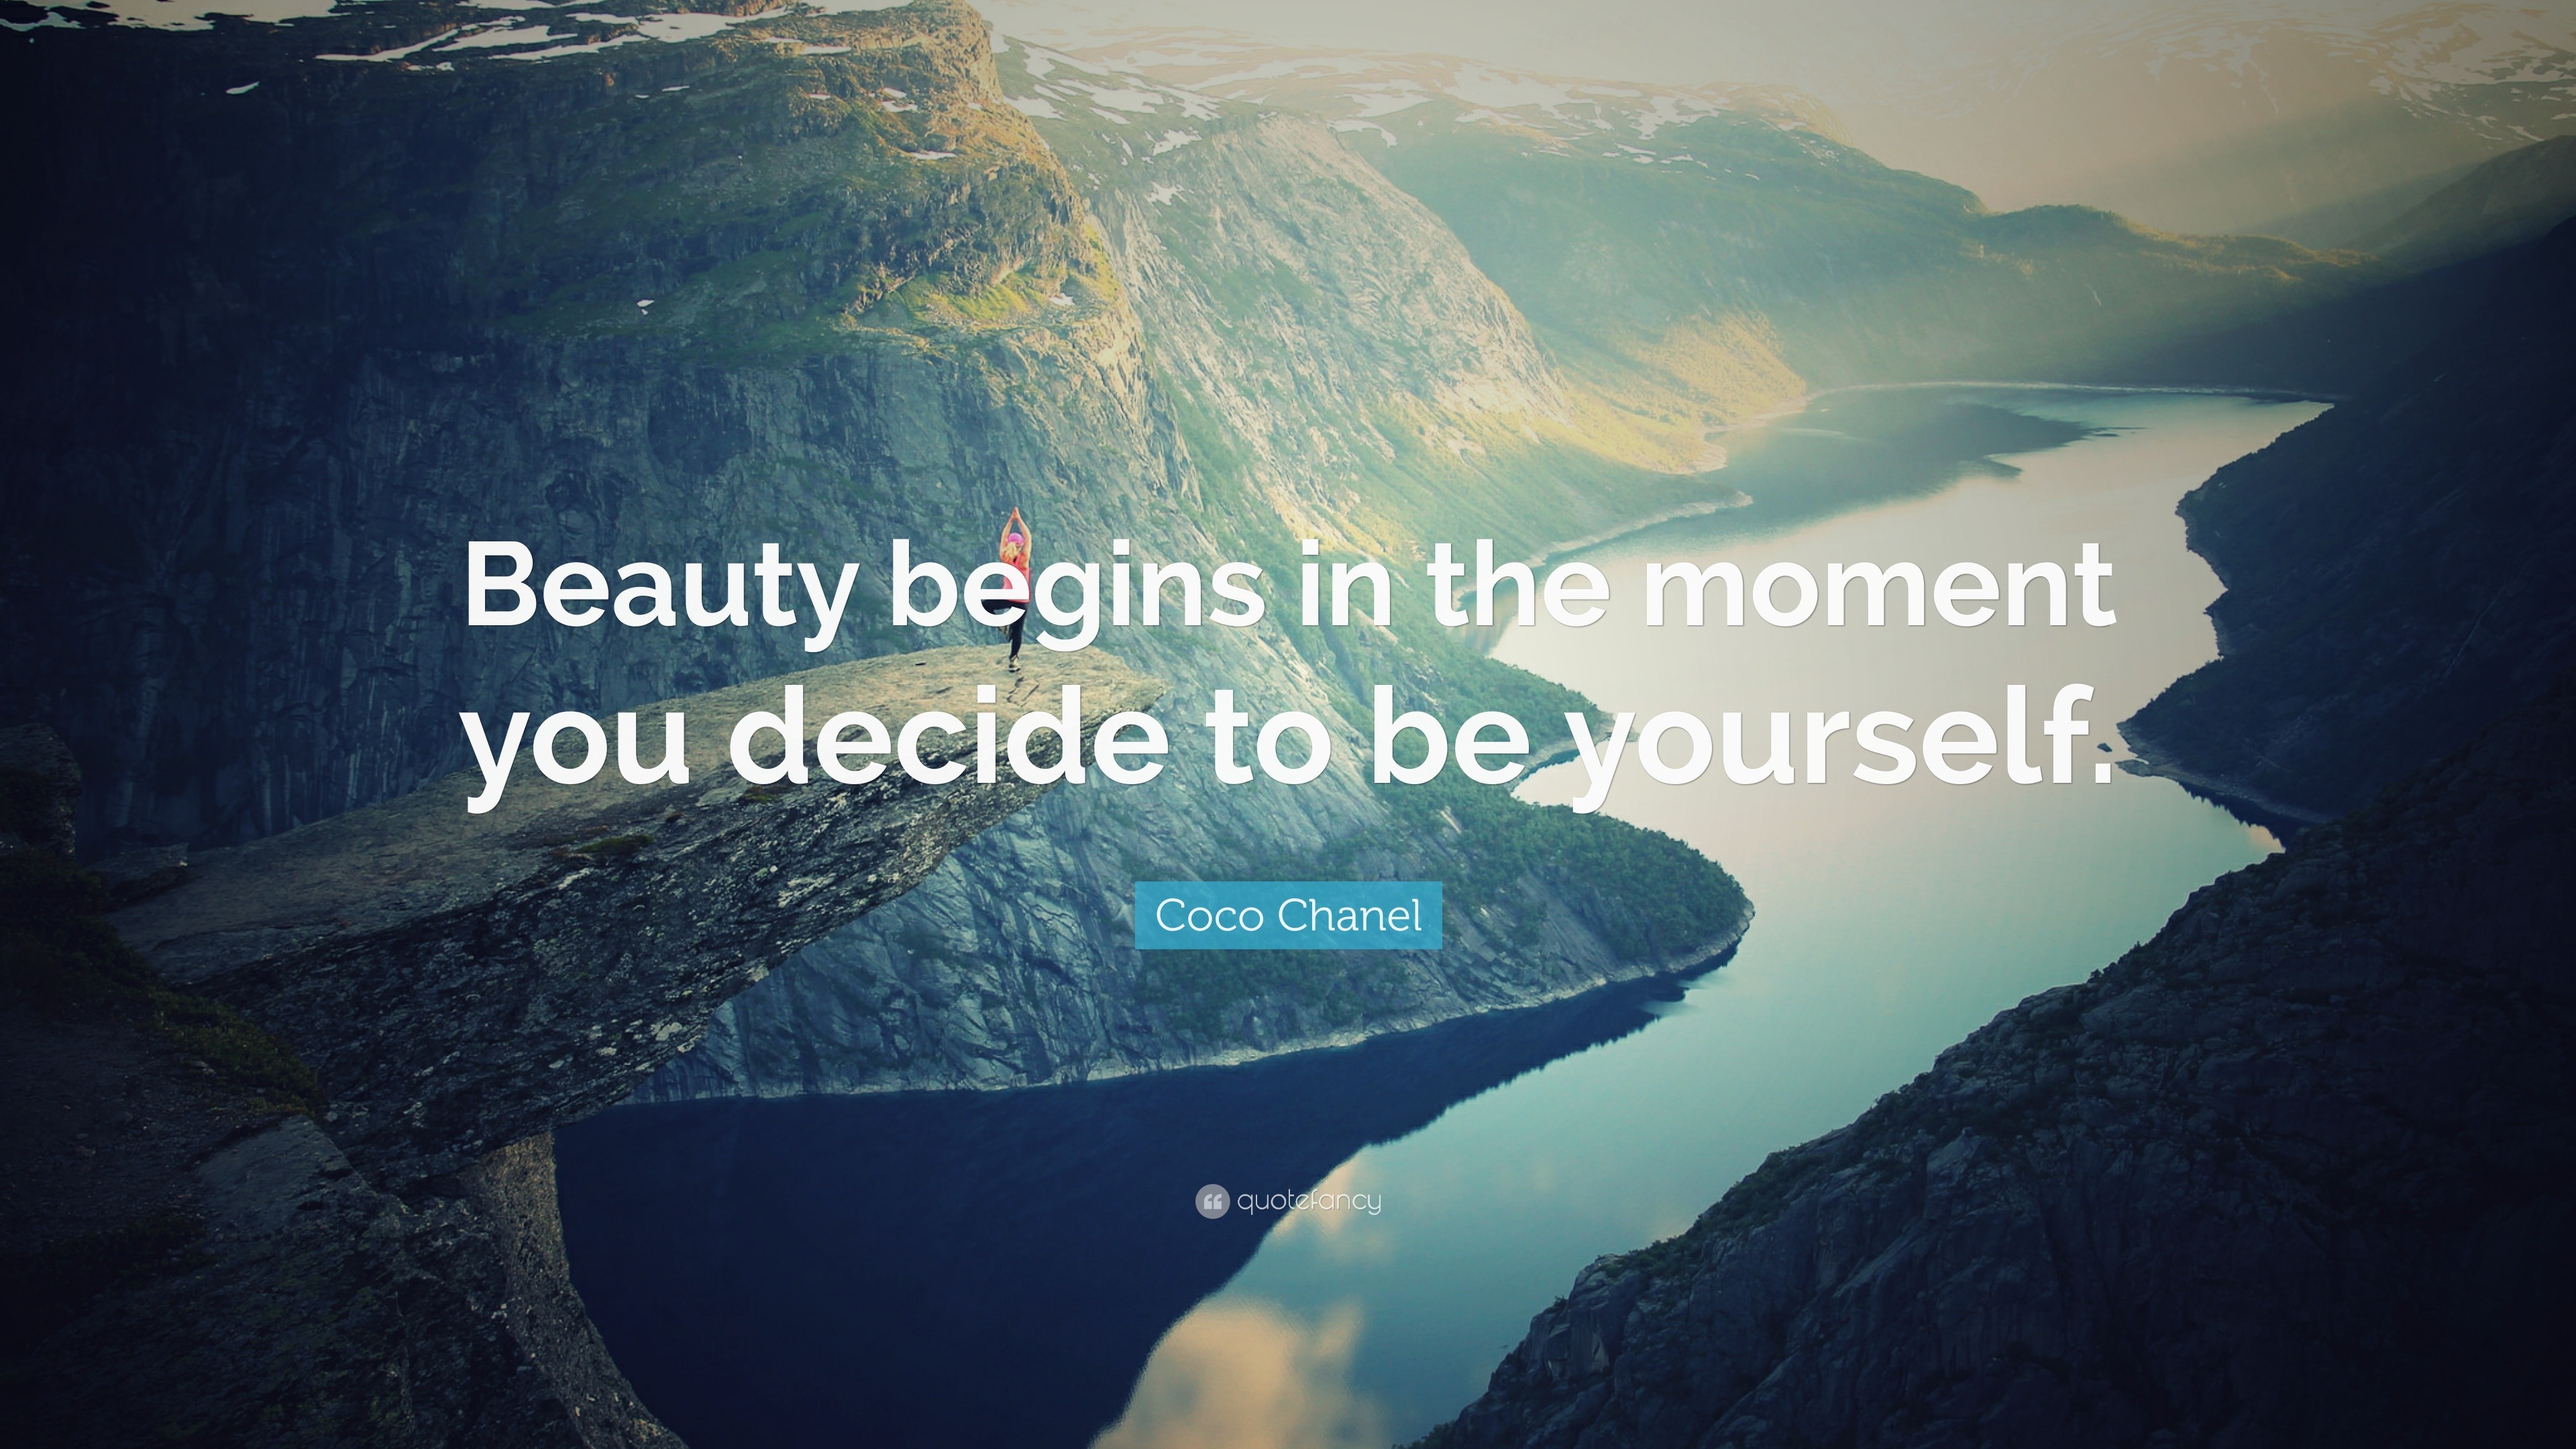 Coco Chanel Quote: “Beauty begins in the moment you decide to be yourself.”